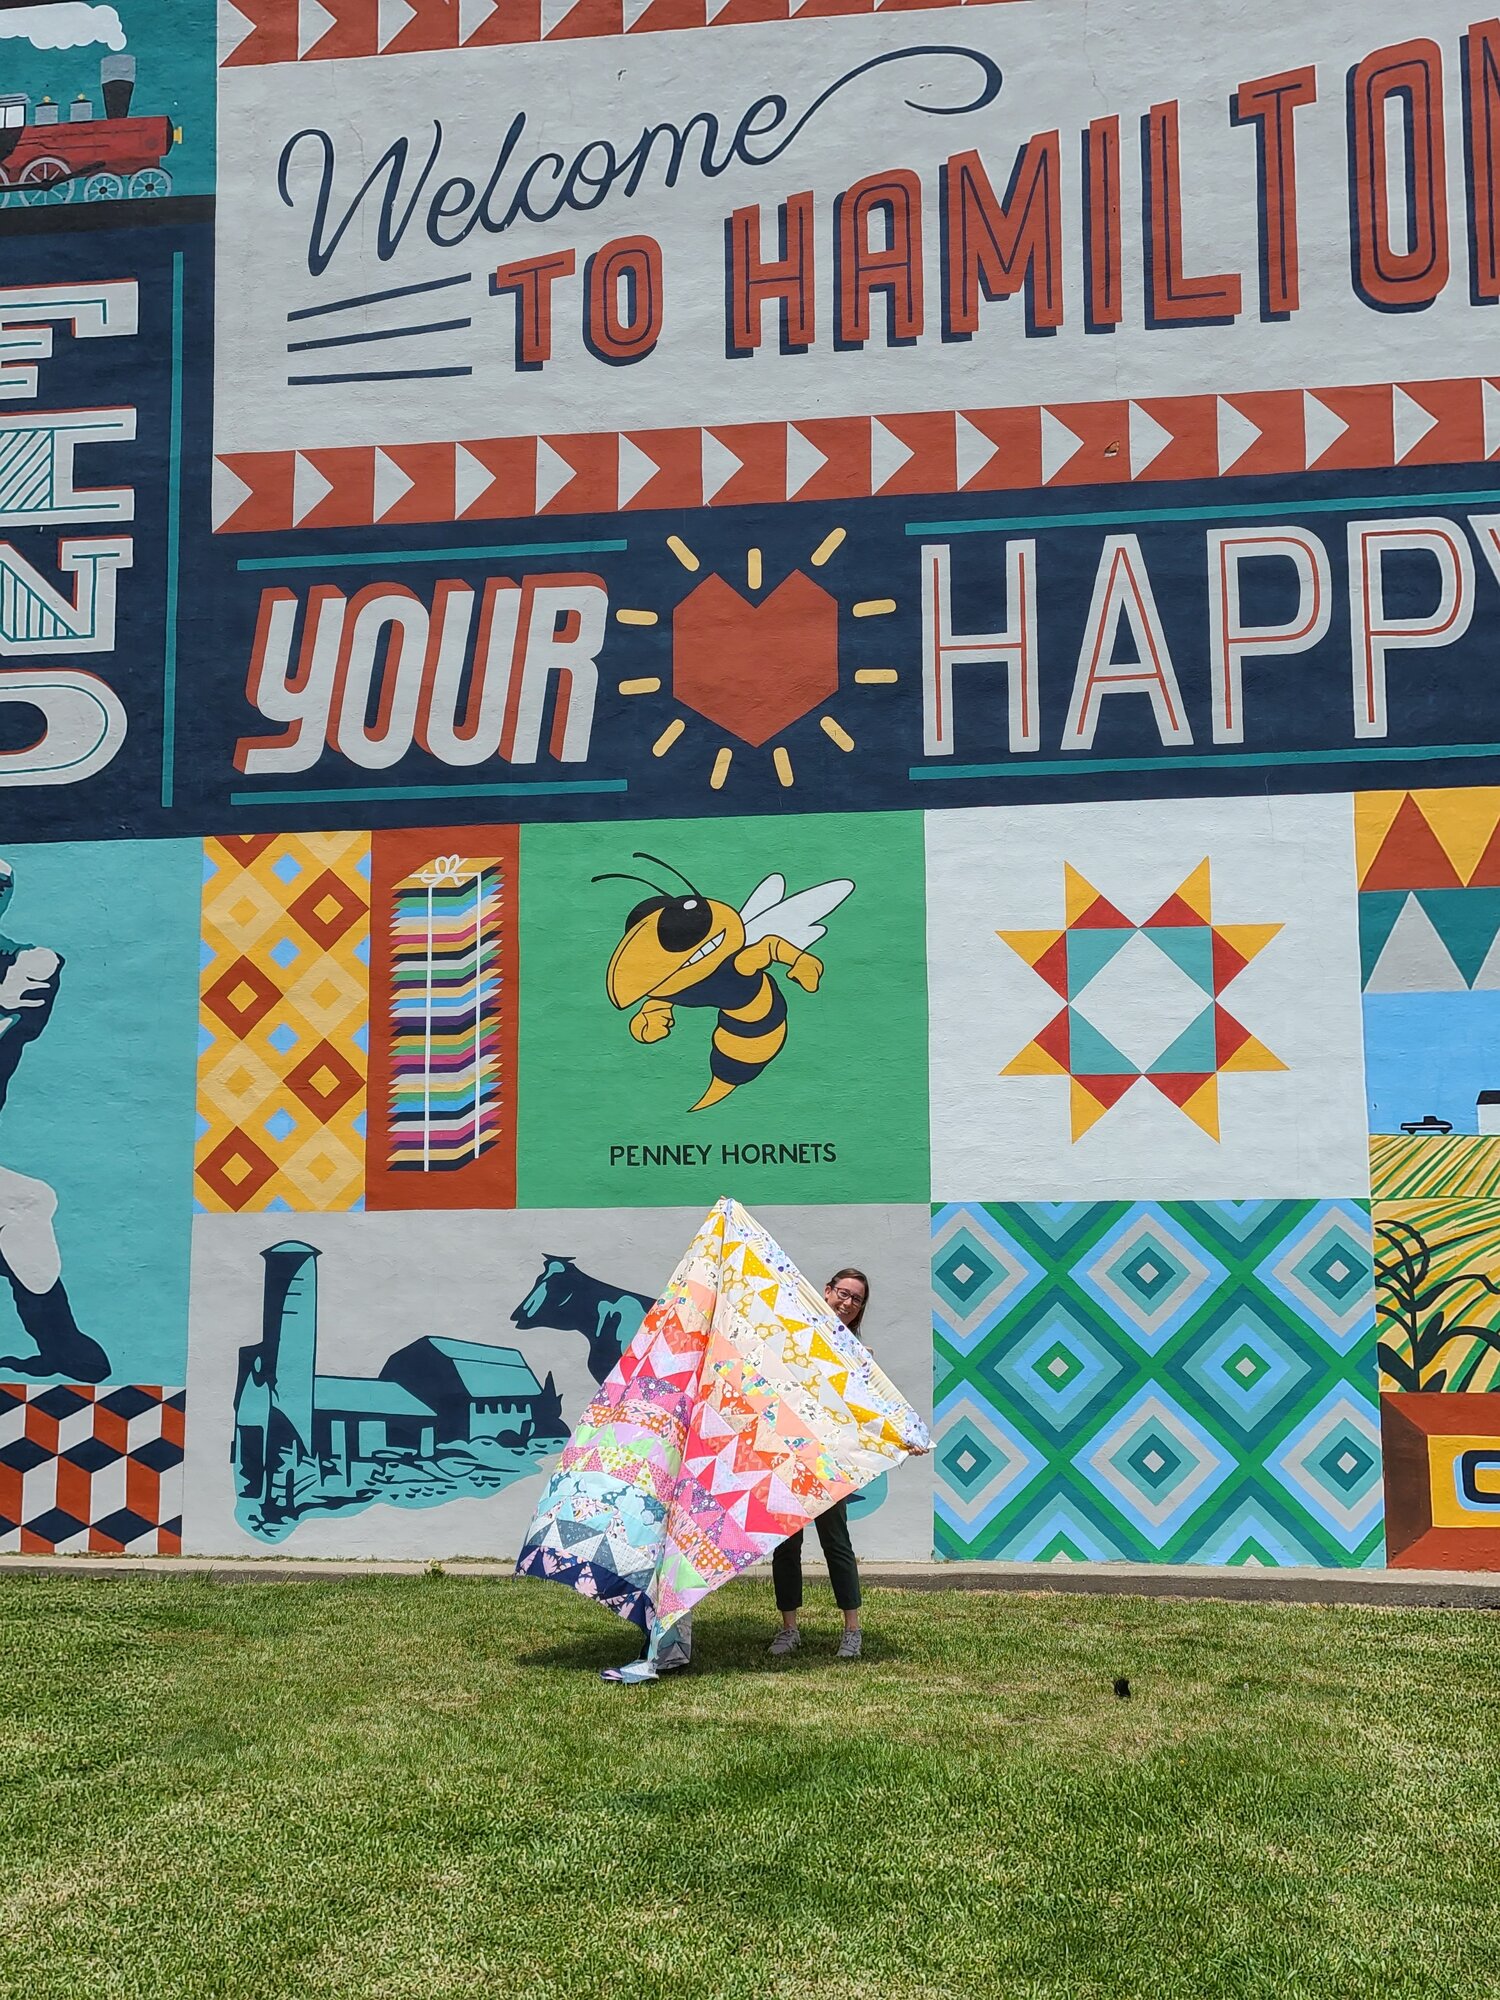 Sarah took her amazing quilt all the way to Quilt Town USA on a birthday trip and got this cute picture in front of the Hamilton, Missouri mural! Sarah is a nurse, a fur mama, and such a sweet and talented quilty friend! You can find her on IG @mtngalrn.